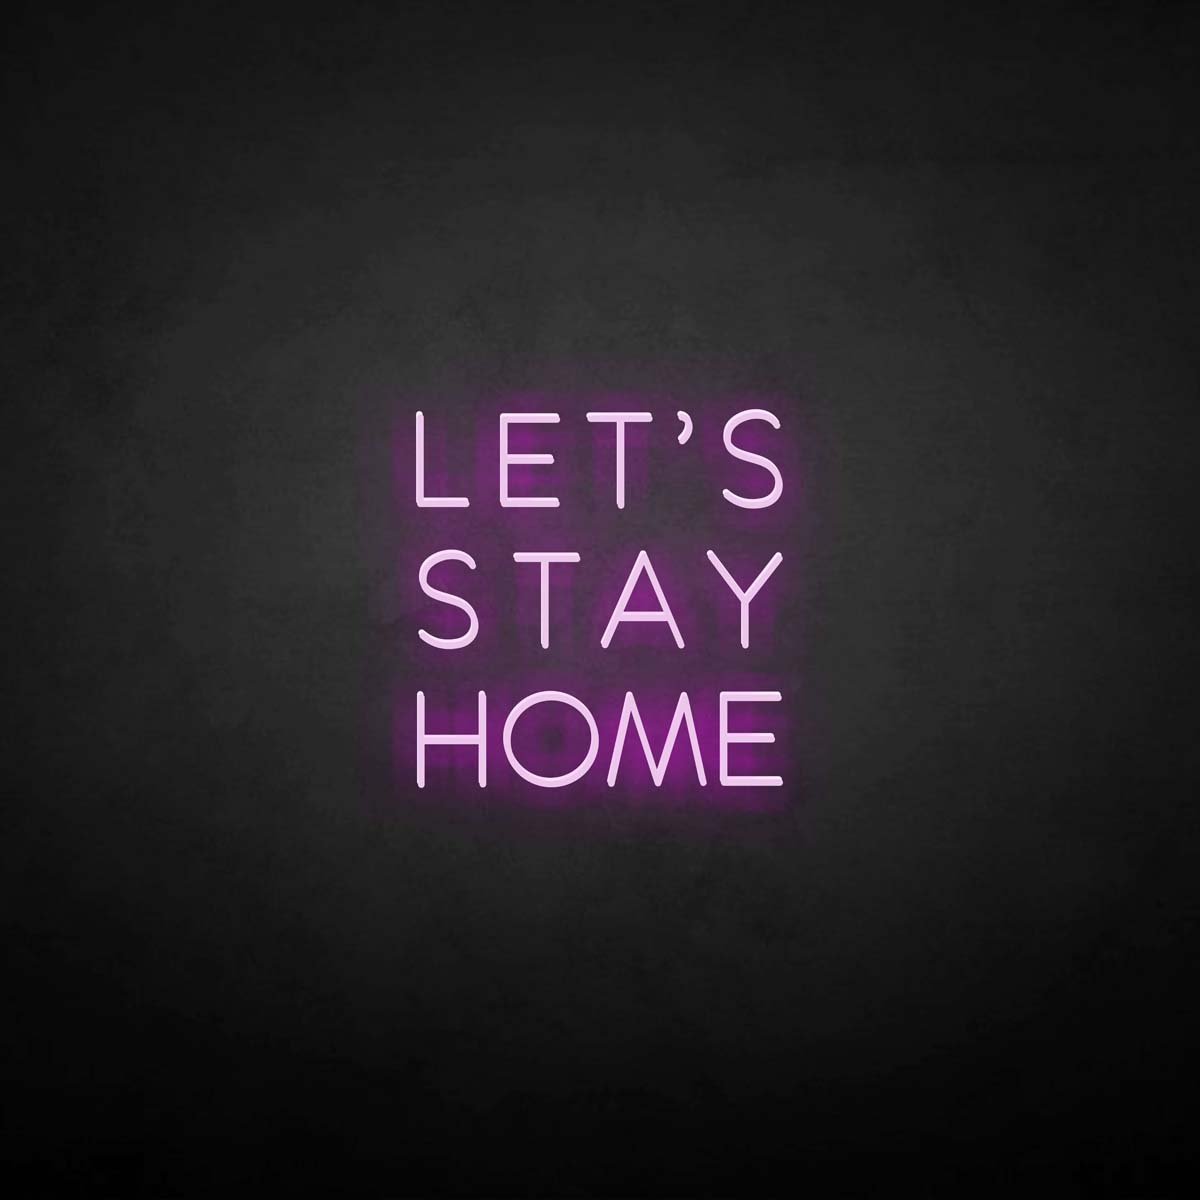 Let's Stay Home neon sign